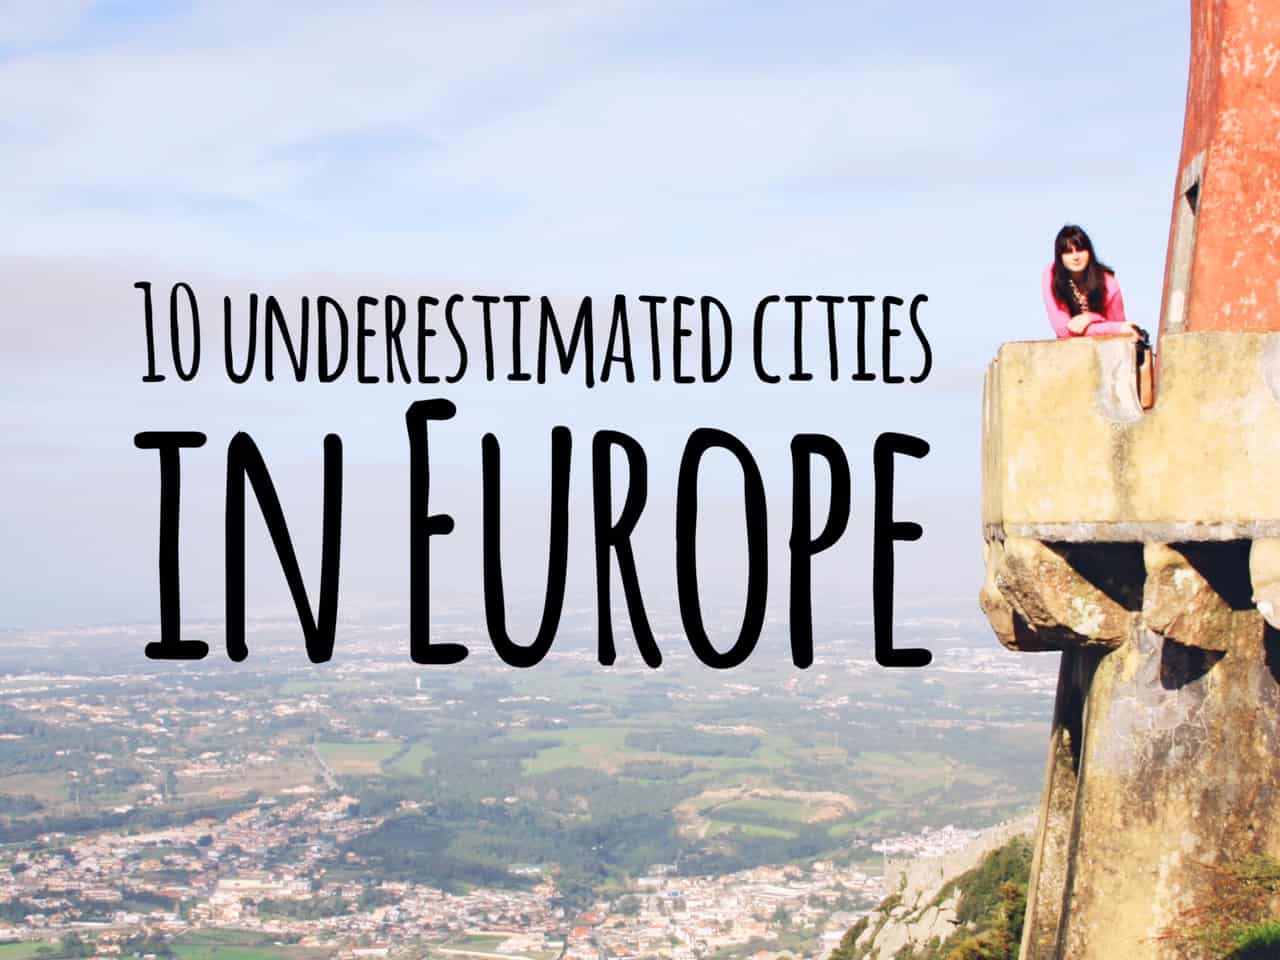 10 underestimated cities in Europe